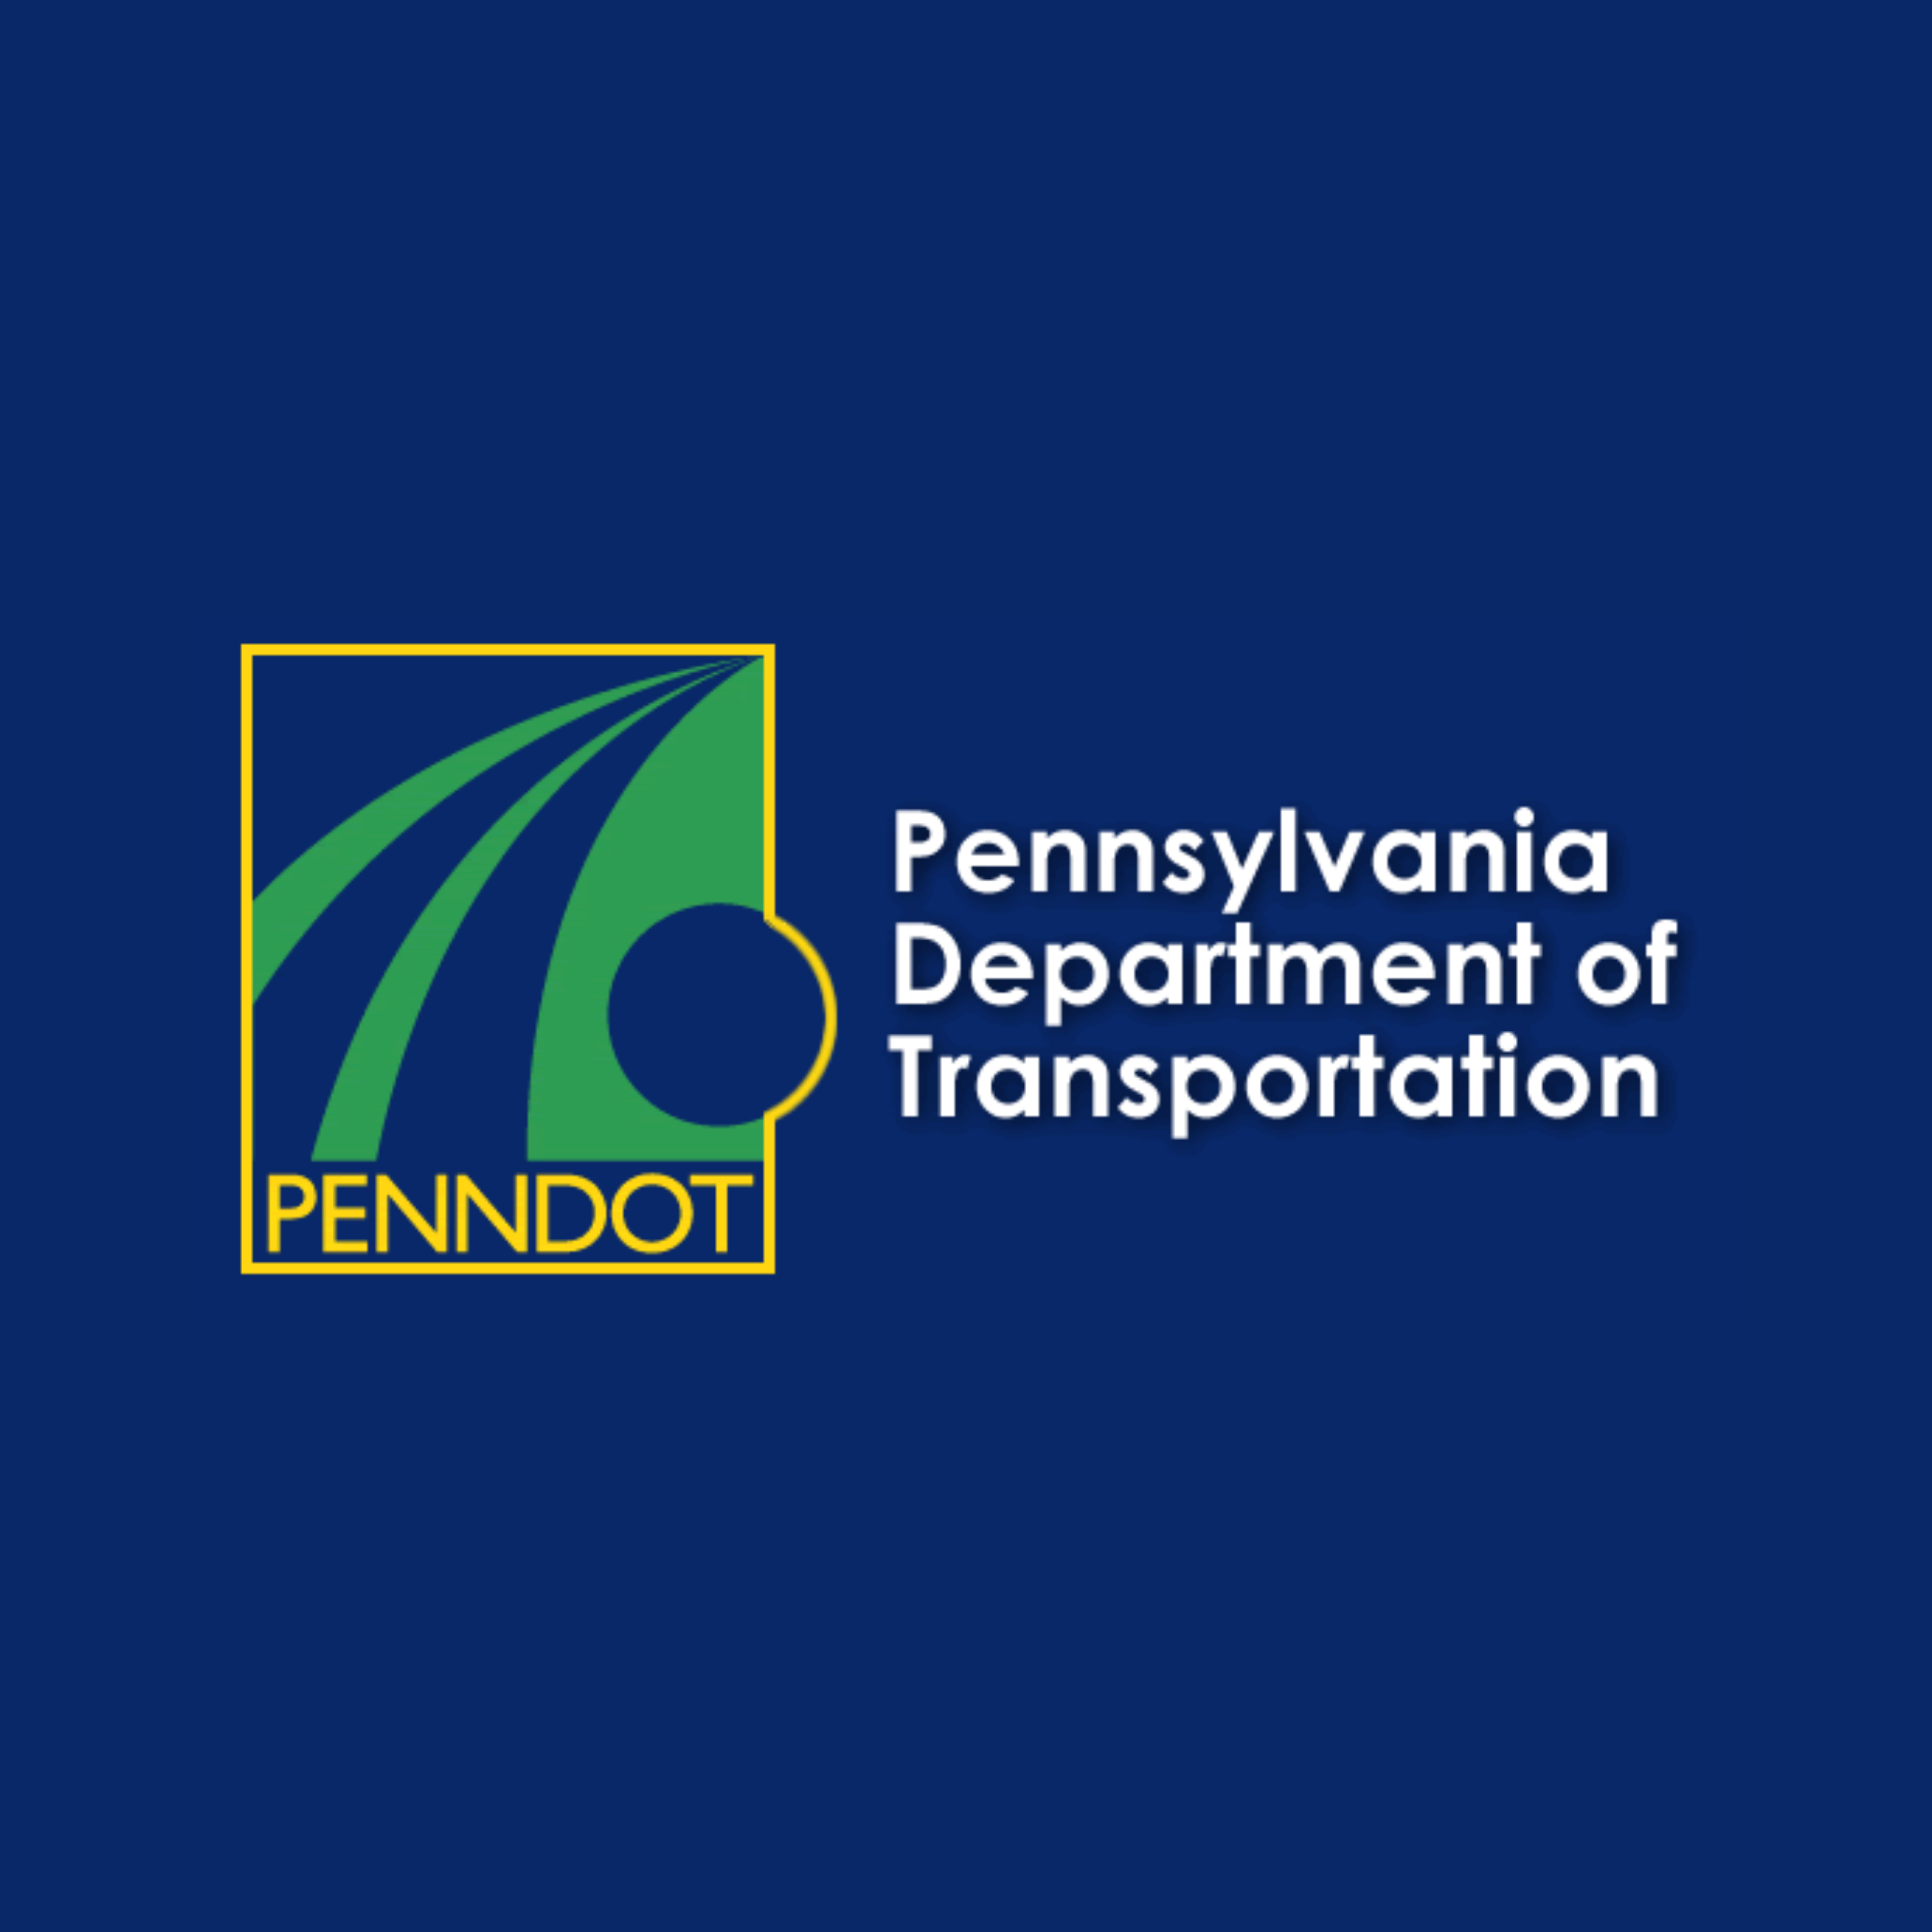 Flint Hill Road Closed for Sink Hole Repair in Upper Merion Township